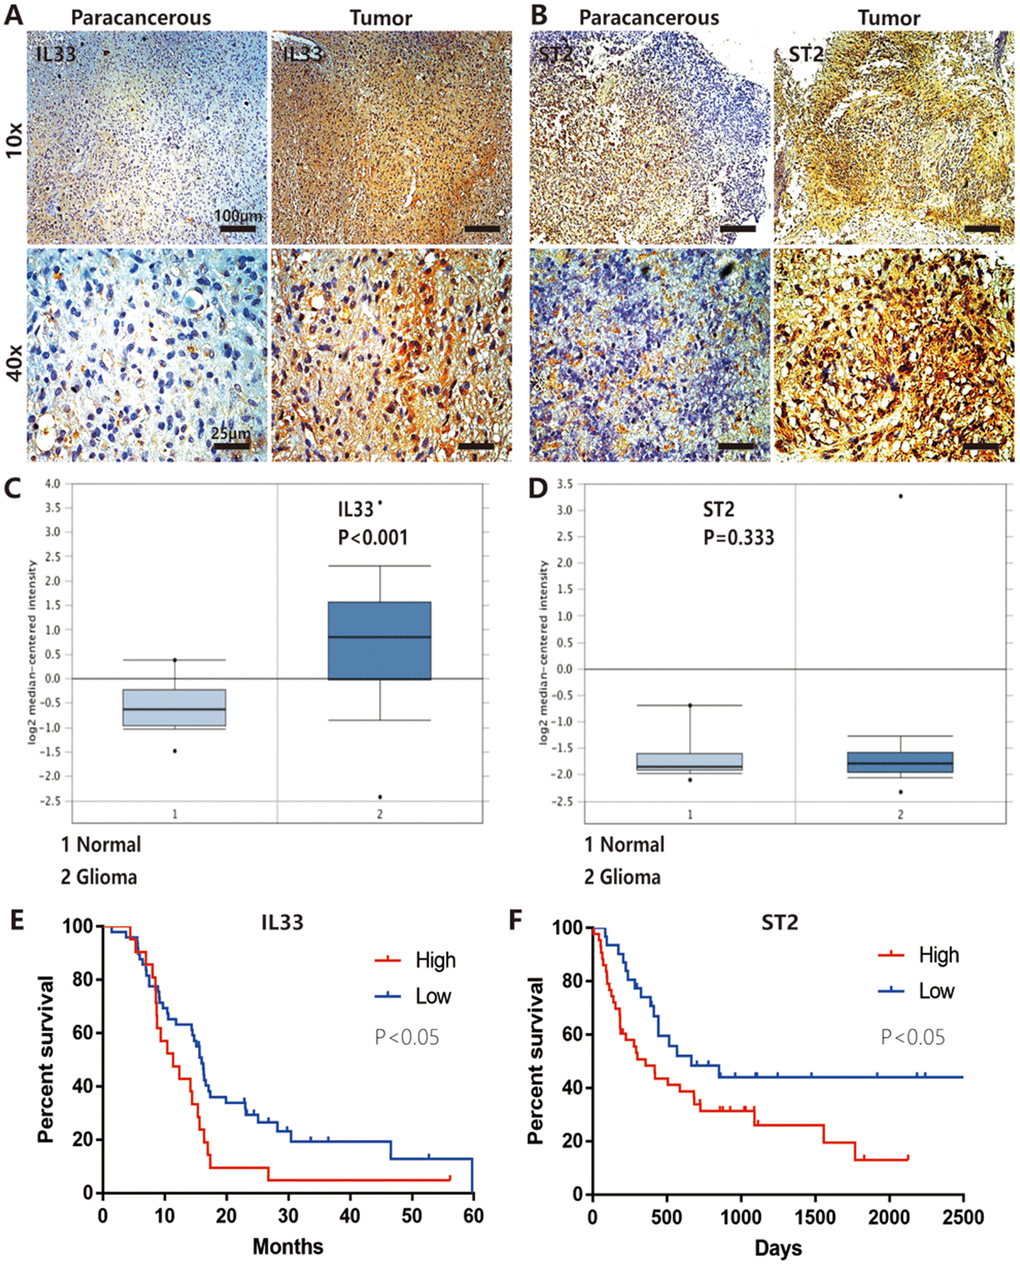 IL-33 and ST2 expression was increased in glioma and correlated with patient prognosis. (A and B) IL-33 and ST2 expression was detected with conventional immunohistochemical staining in clinical glioma samples. The representative images showed IL-33 or ST2 expression was increased in tumor tissues compared with paracancerous tissues. (C and D) The mRNA expression data of glioma compared with normal brain tissues in the TCGA Database (n=552), the expression of IL-33 was significantly increased in tumor tissues (pE and F) The association between the survival in patients with glioma and IL-33/ST2 expression (n=66 and n=74 for (E and F) respectively). Survival functions were estimated by Kaplan–Meier methods. Hazard ratios (HR) for (E) High/Low=1.921, Low/High=0.575; HR for (F) High/Low=1.828, Low/High=0.547.